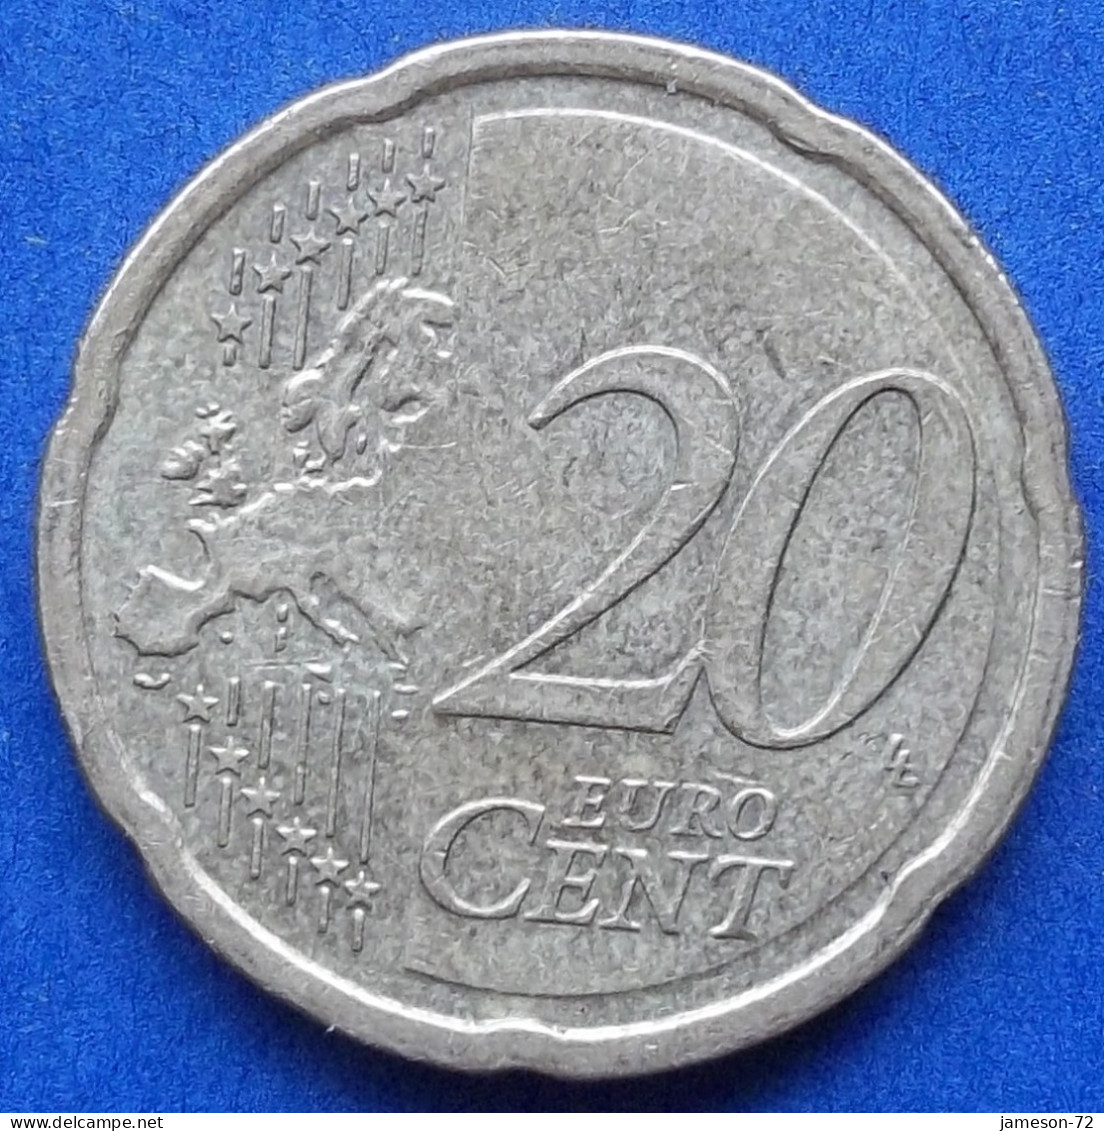 LITHUANIA - 20 Euro Cents 2015 KM# 209 Euro Coinage (2015) - Edelweiss Coins - Lituanie